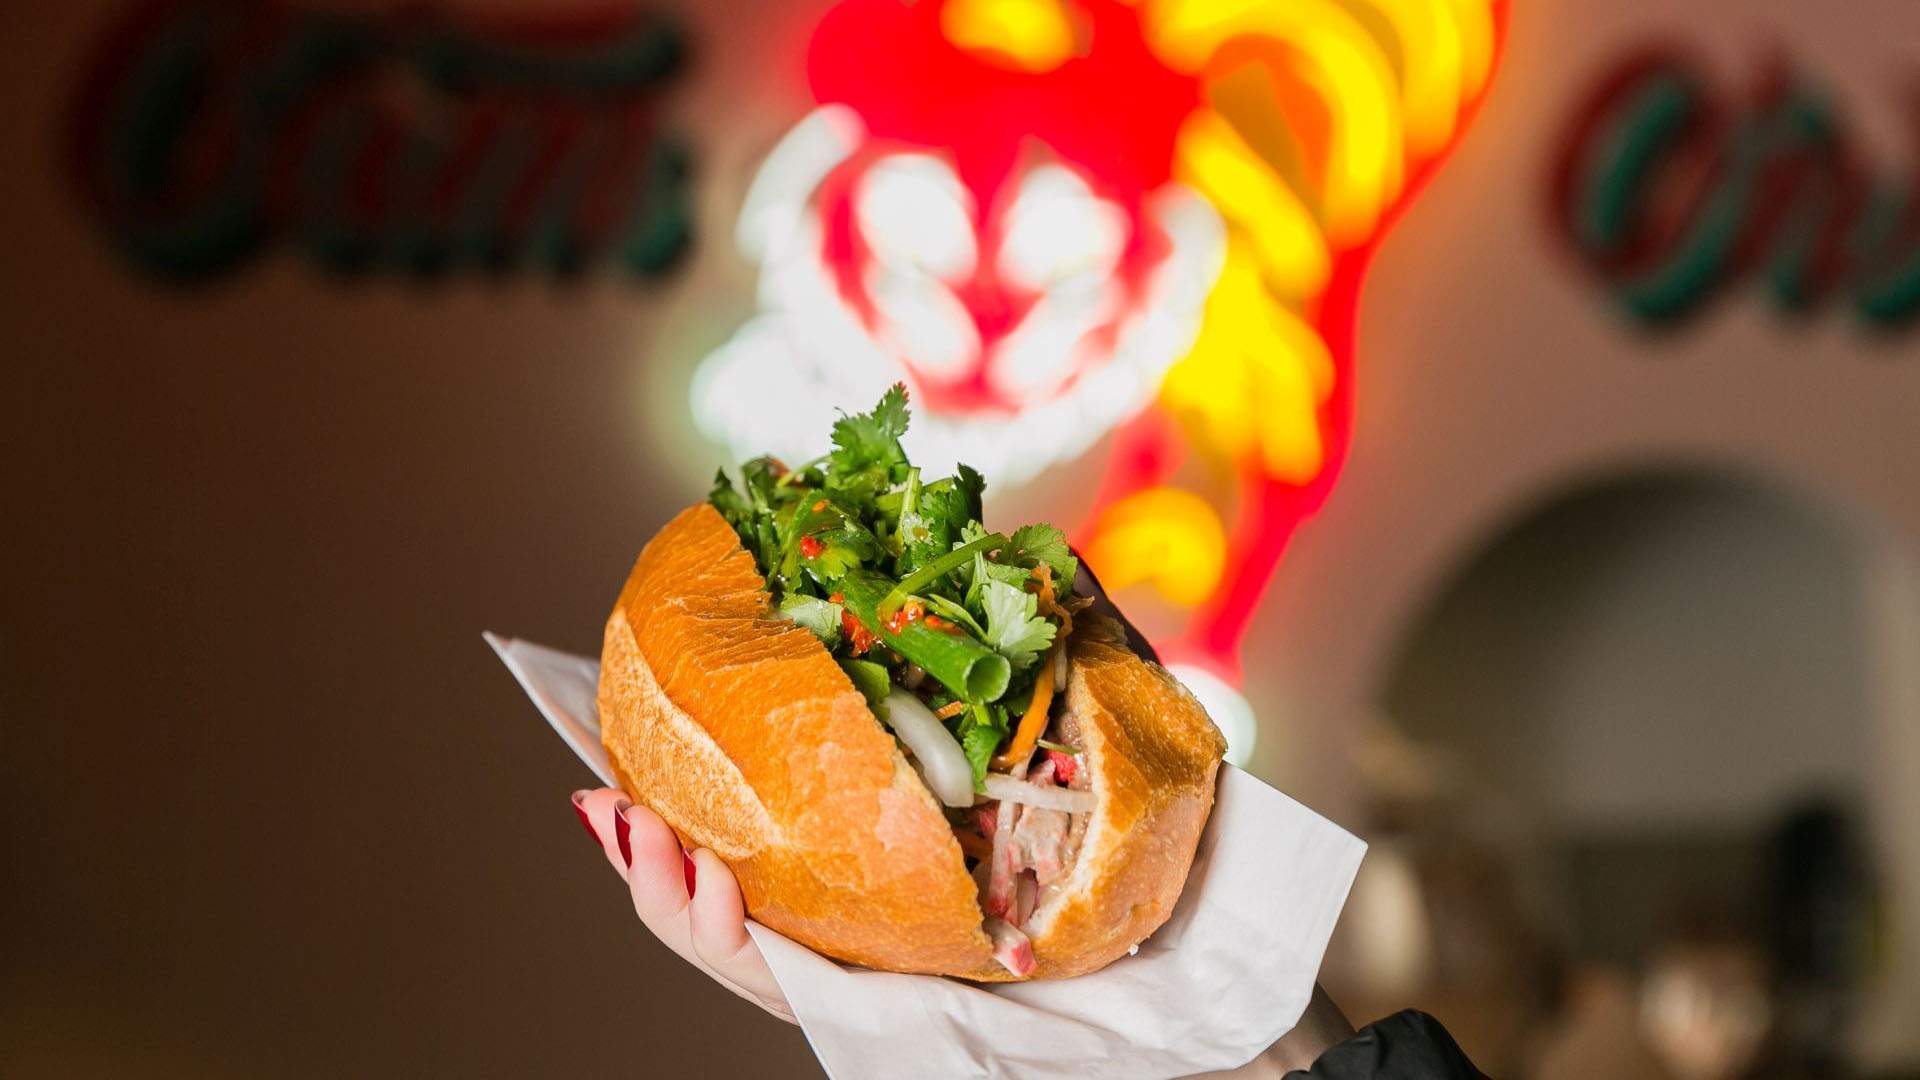 Mary's and Marrickville Pork Roll Are Opening in North Sydney as Part of the New Victoria Cross Station